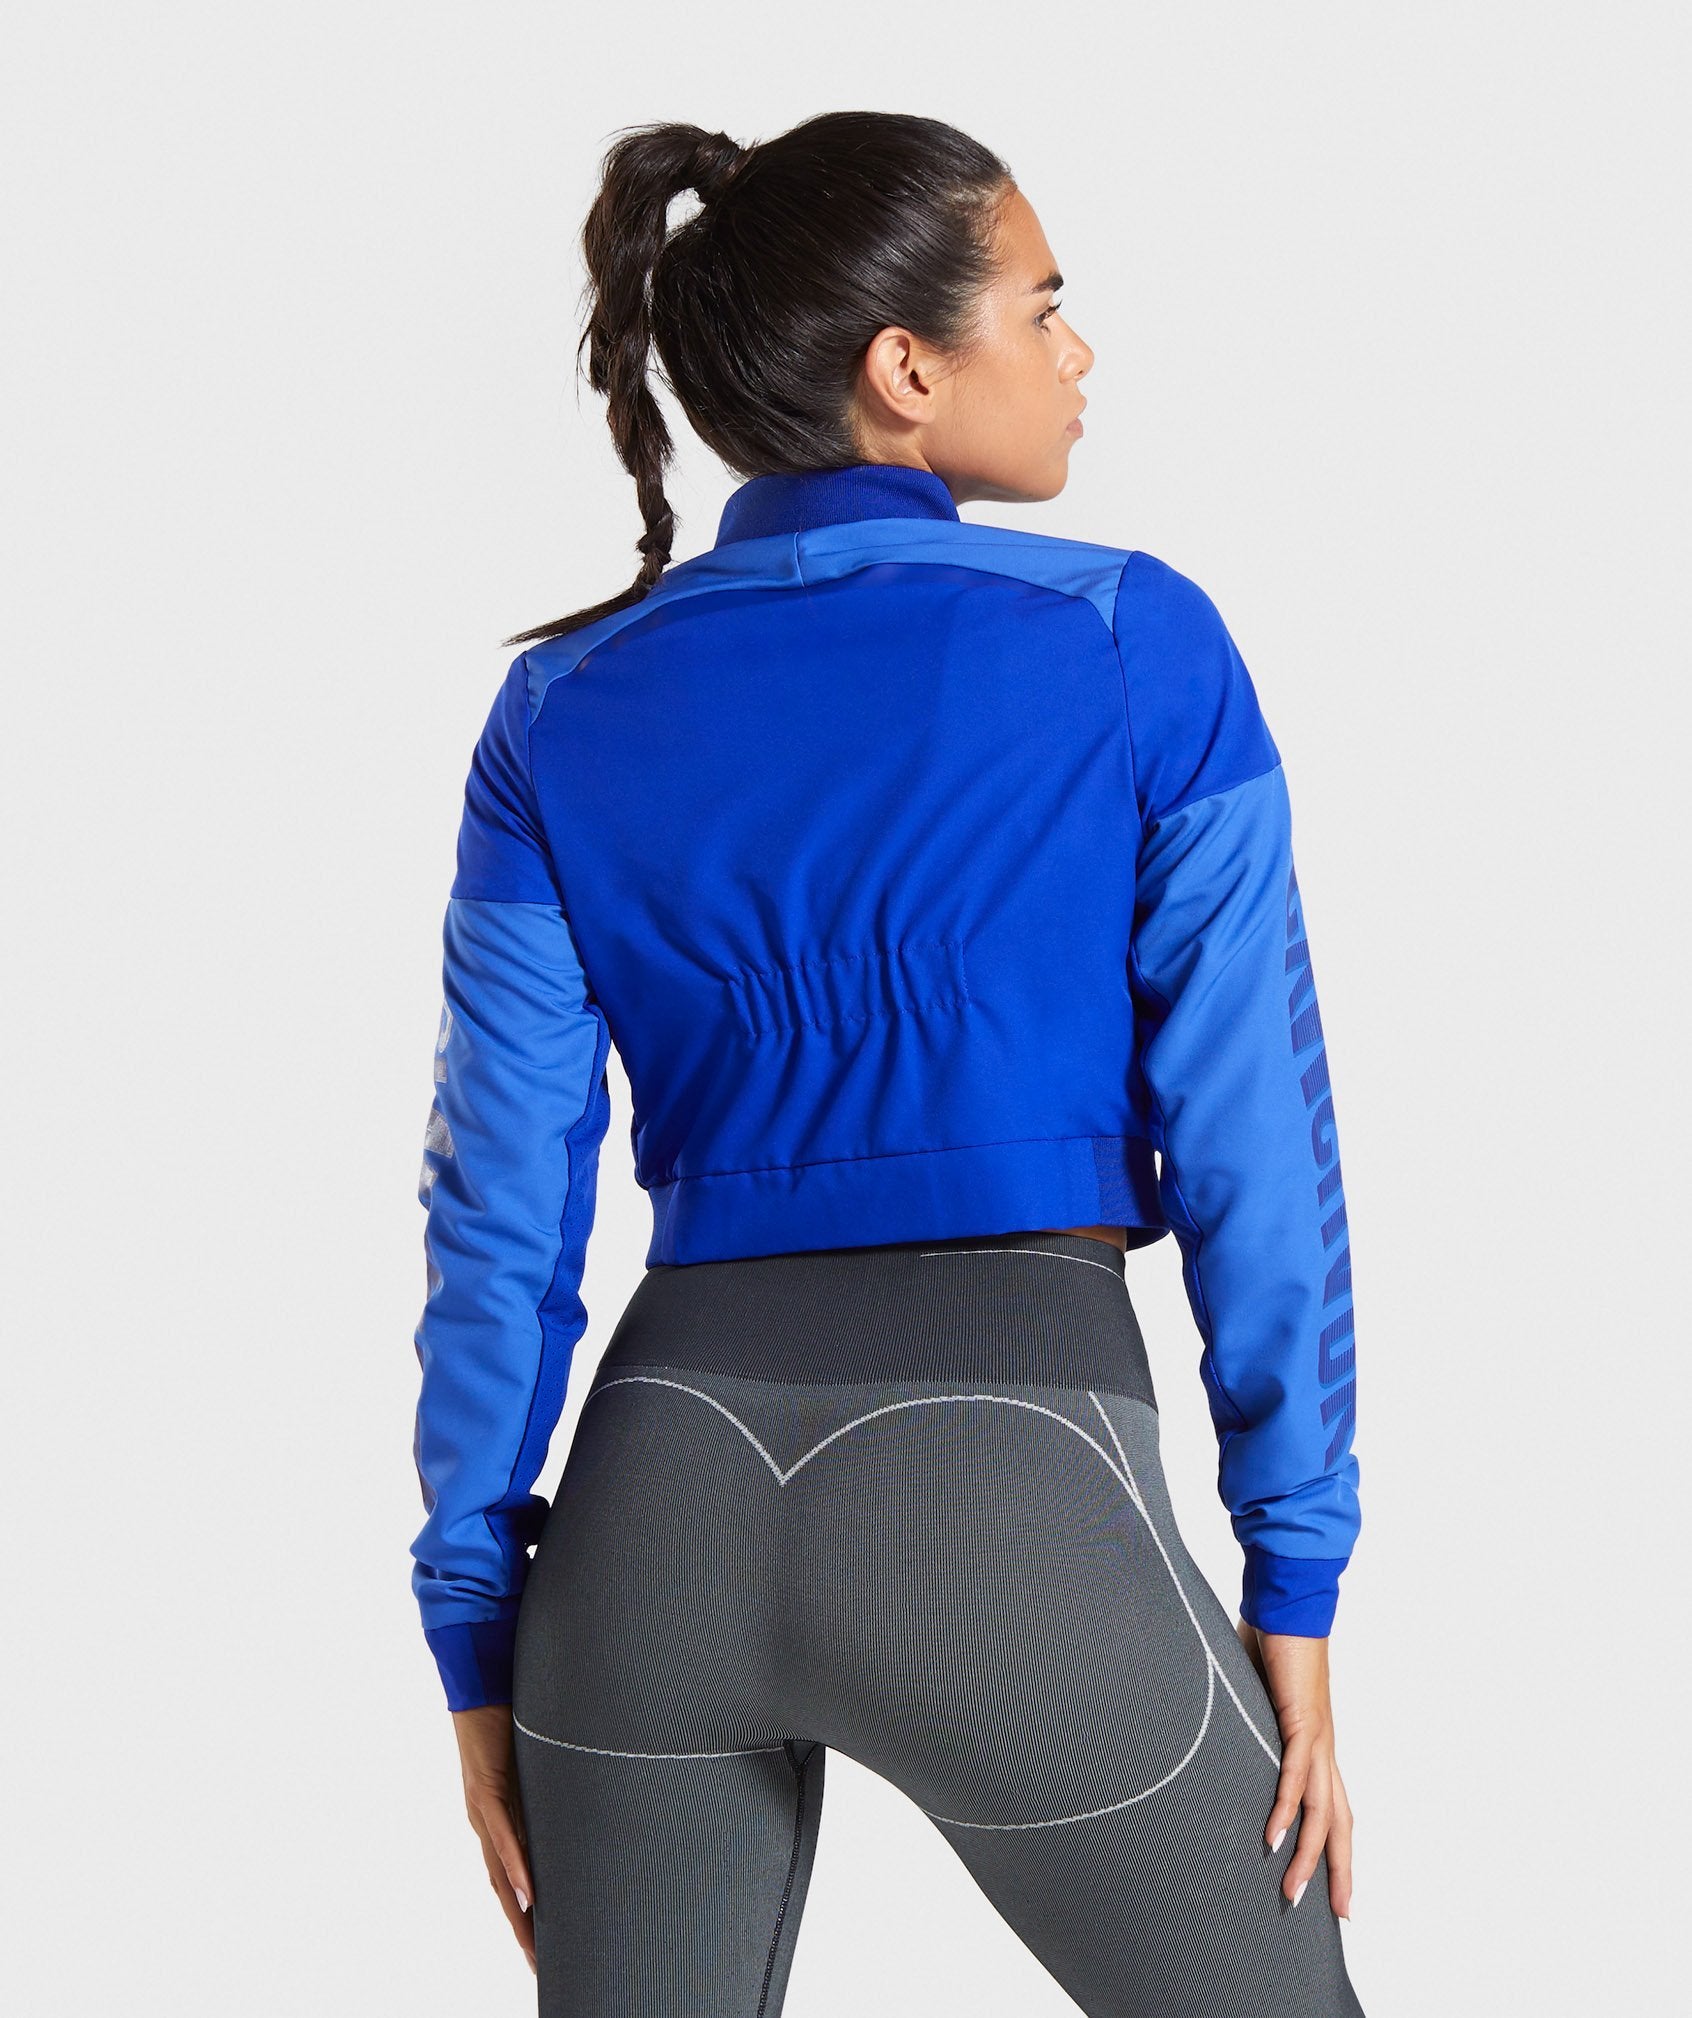 Turbo Track Jacket in Cobalt Blue - view 2